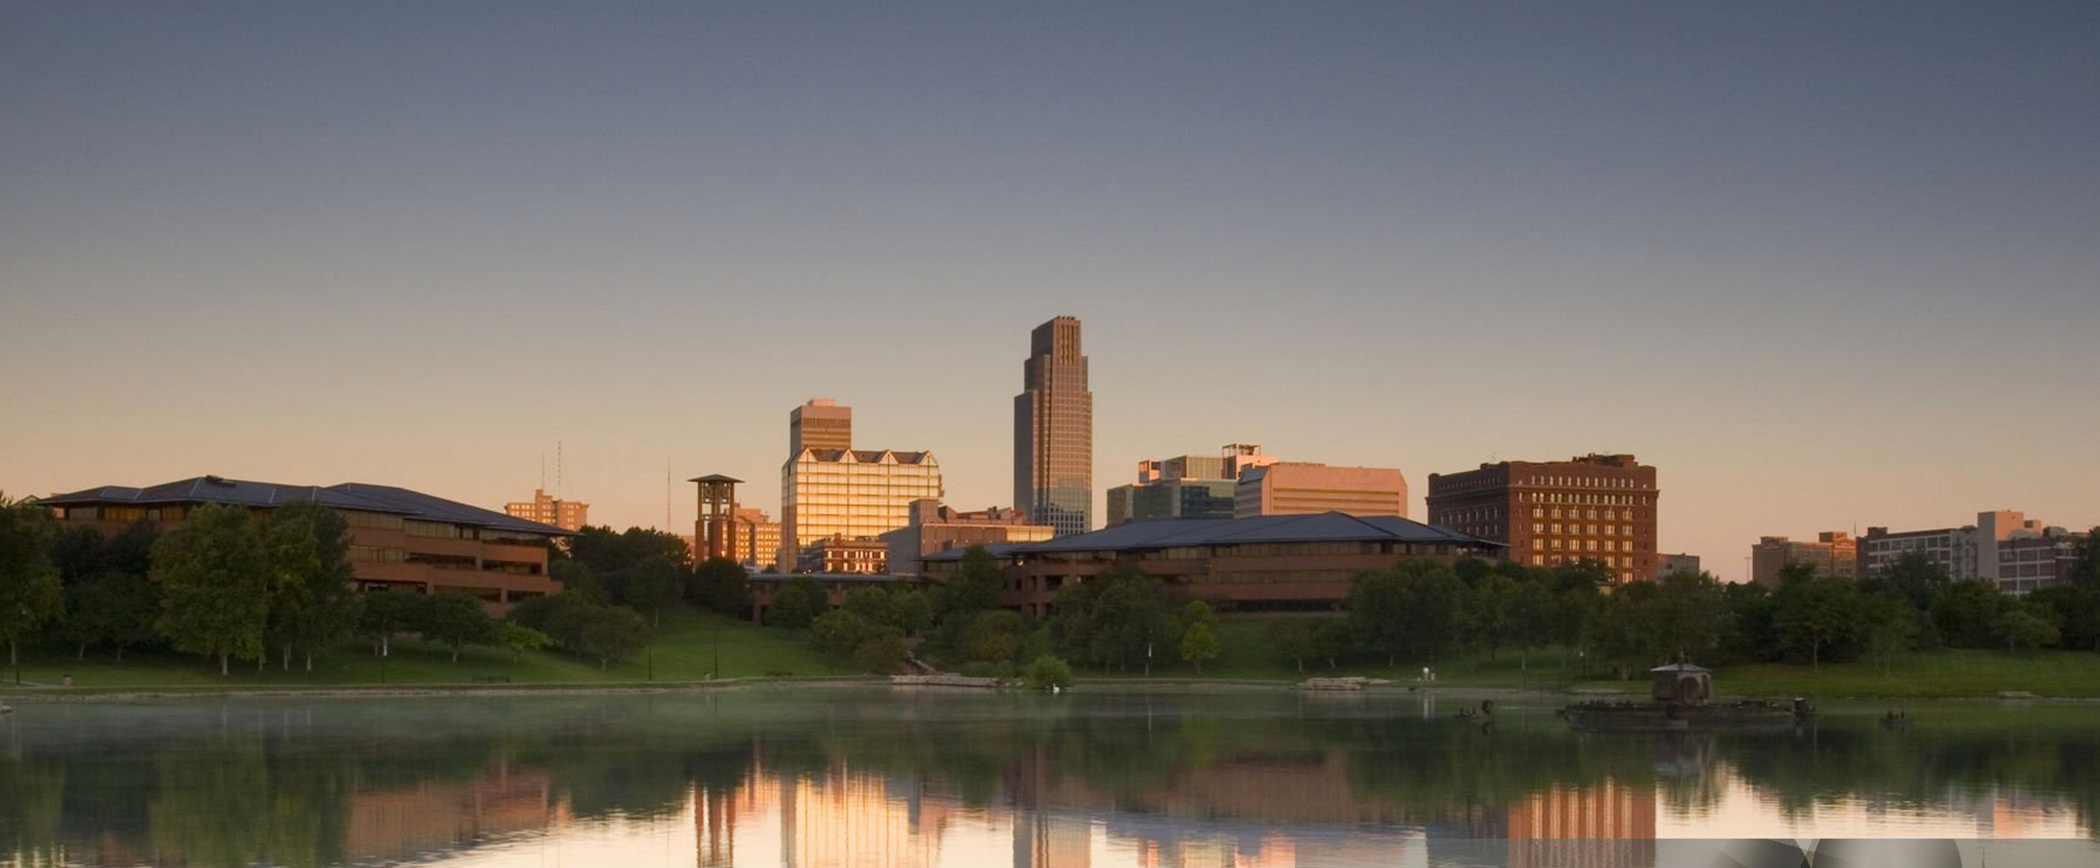 A panoramic view of downtown Omaha at dusk, featuring a serene lake in the foreground with reflections of the skyline. The cityscape includes various buildings with different architectural styles and heights, with the tallest building standing prominently